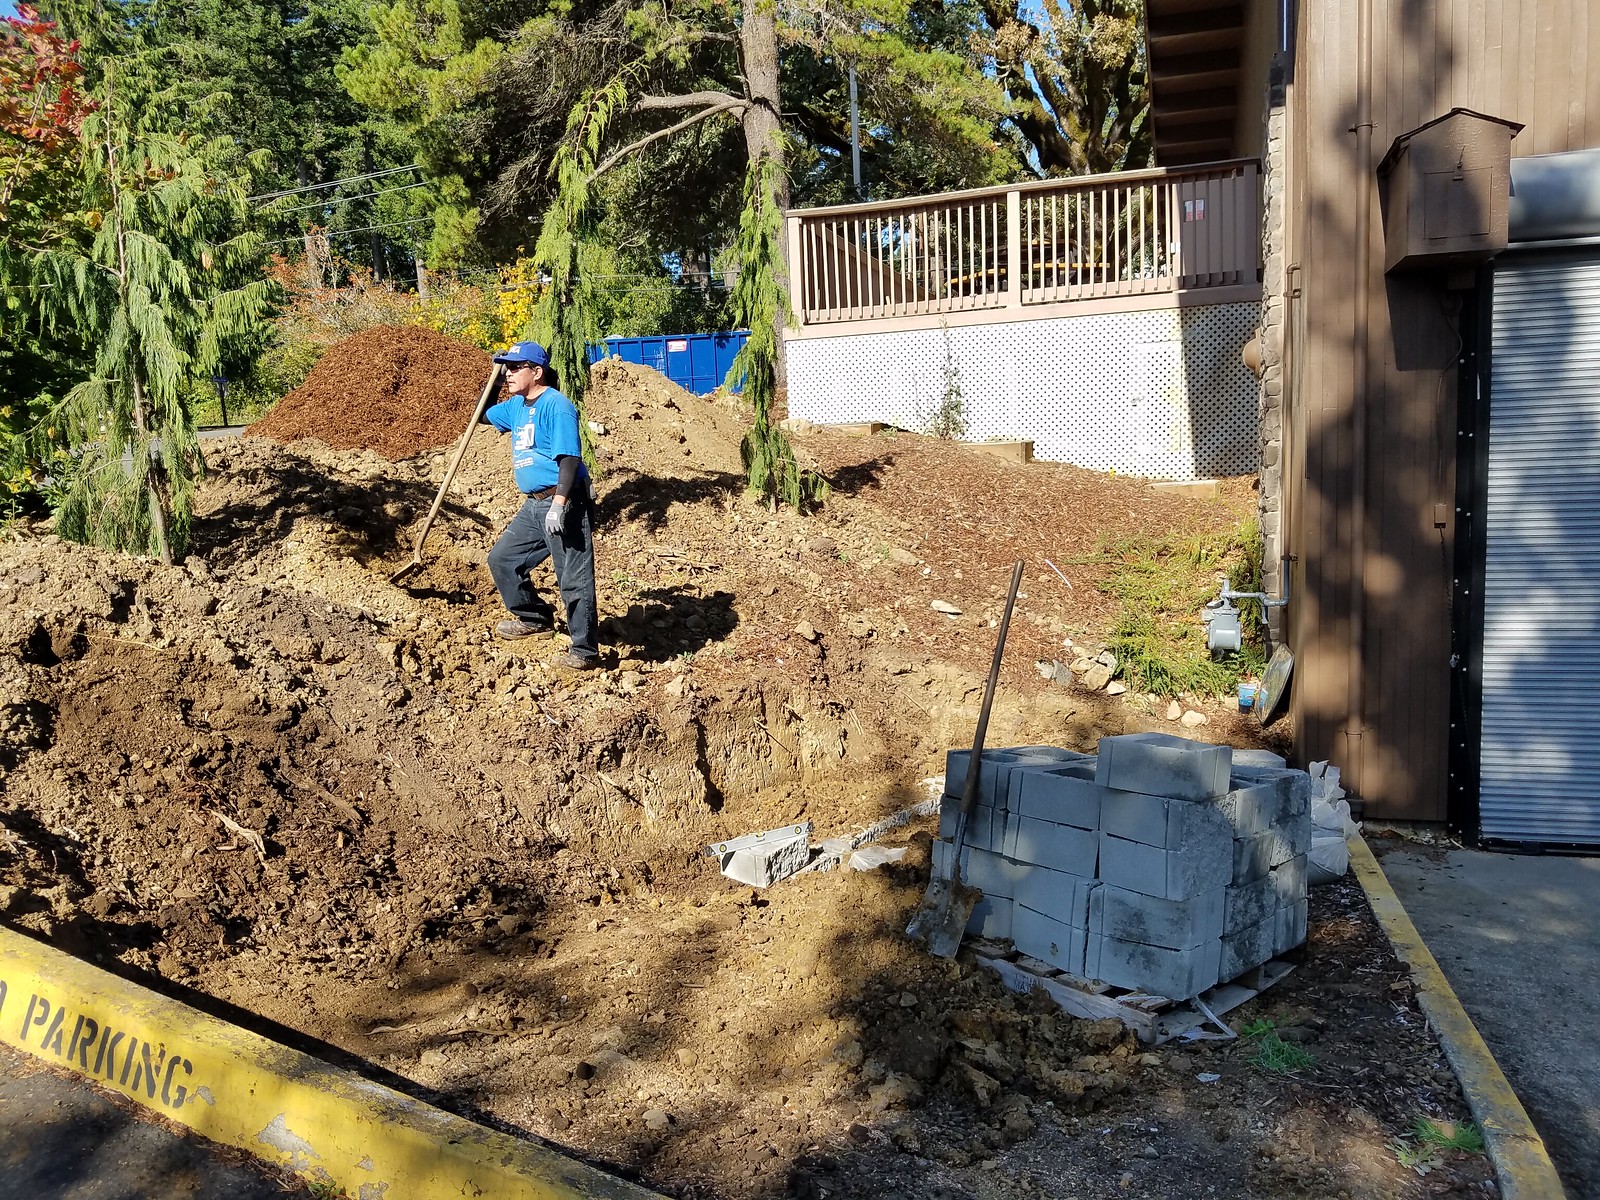 October 4, 2017--Working on the landscaping